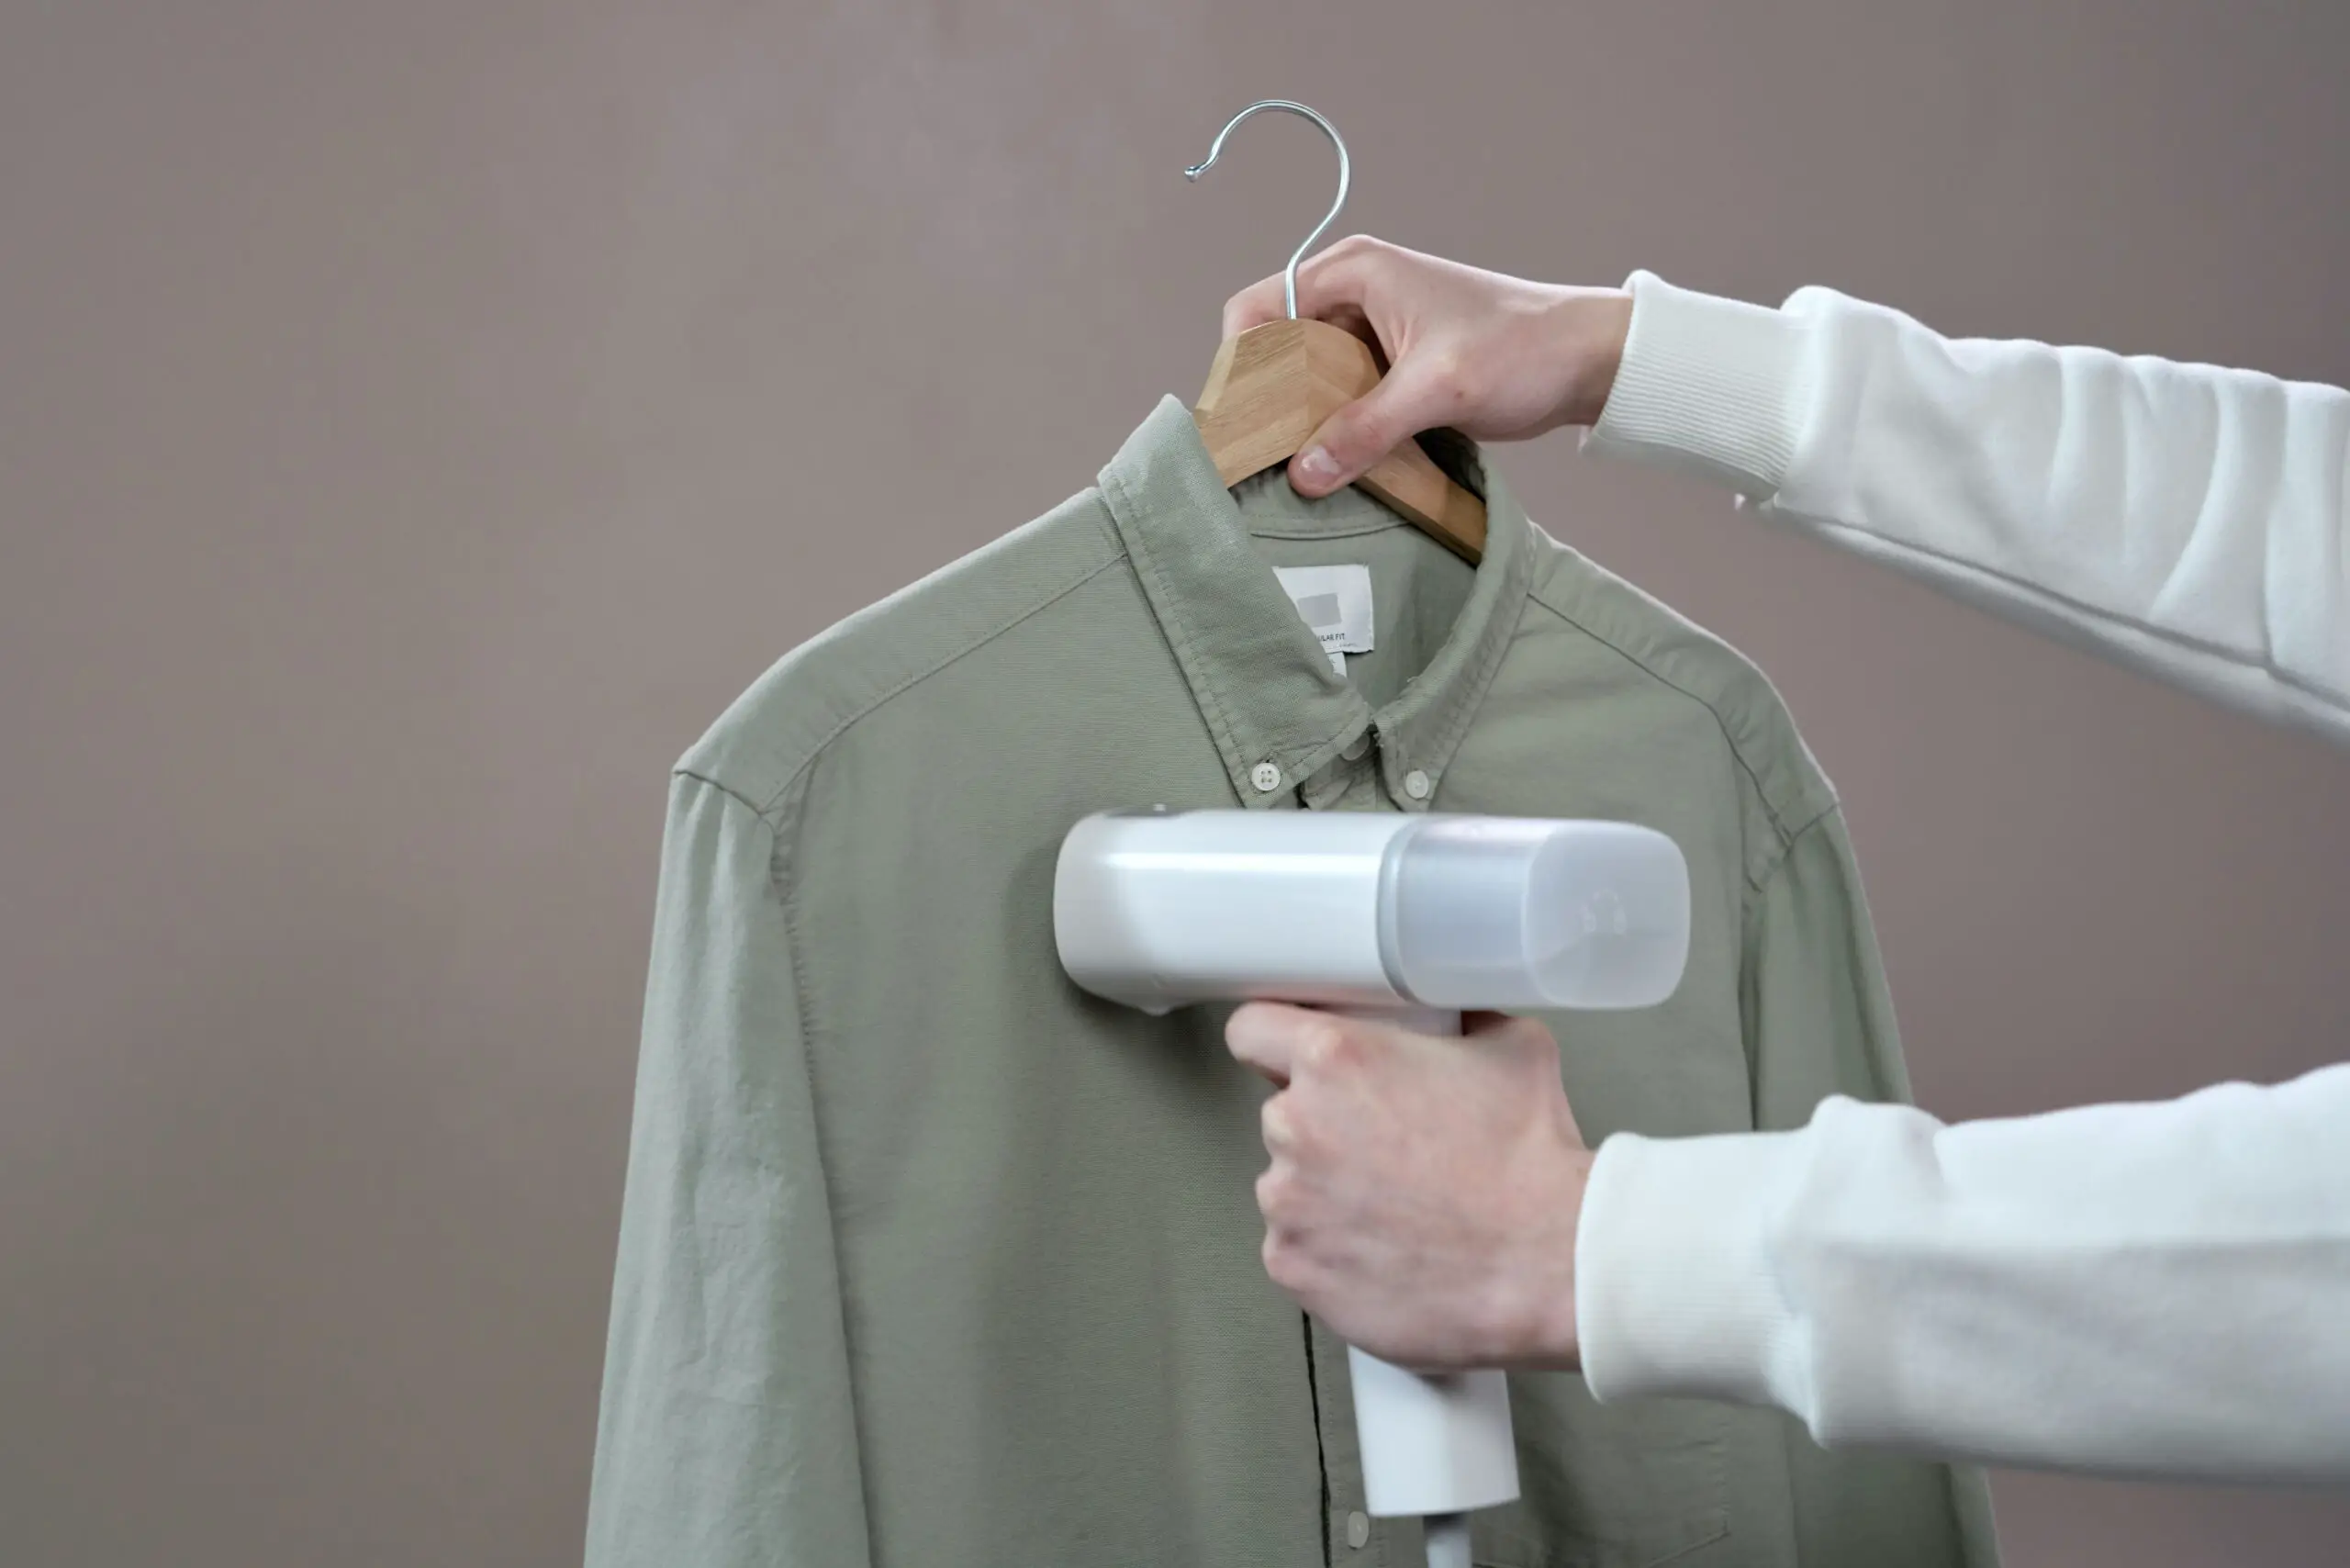 Clothes steamer being used by guy on clothes